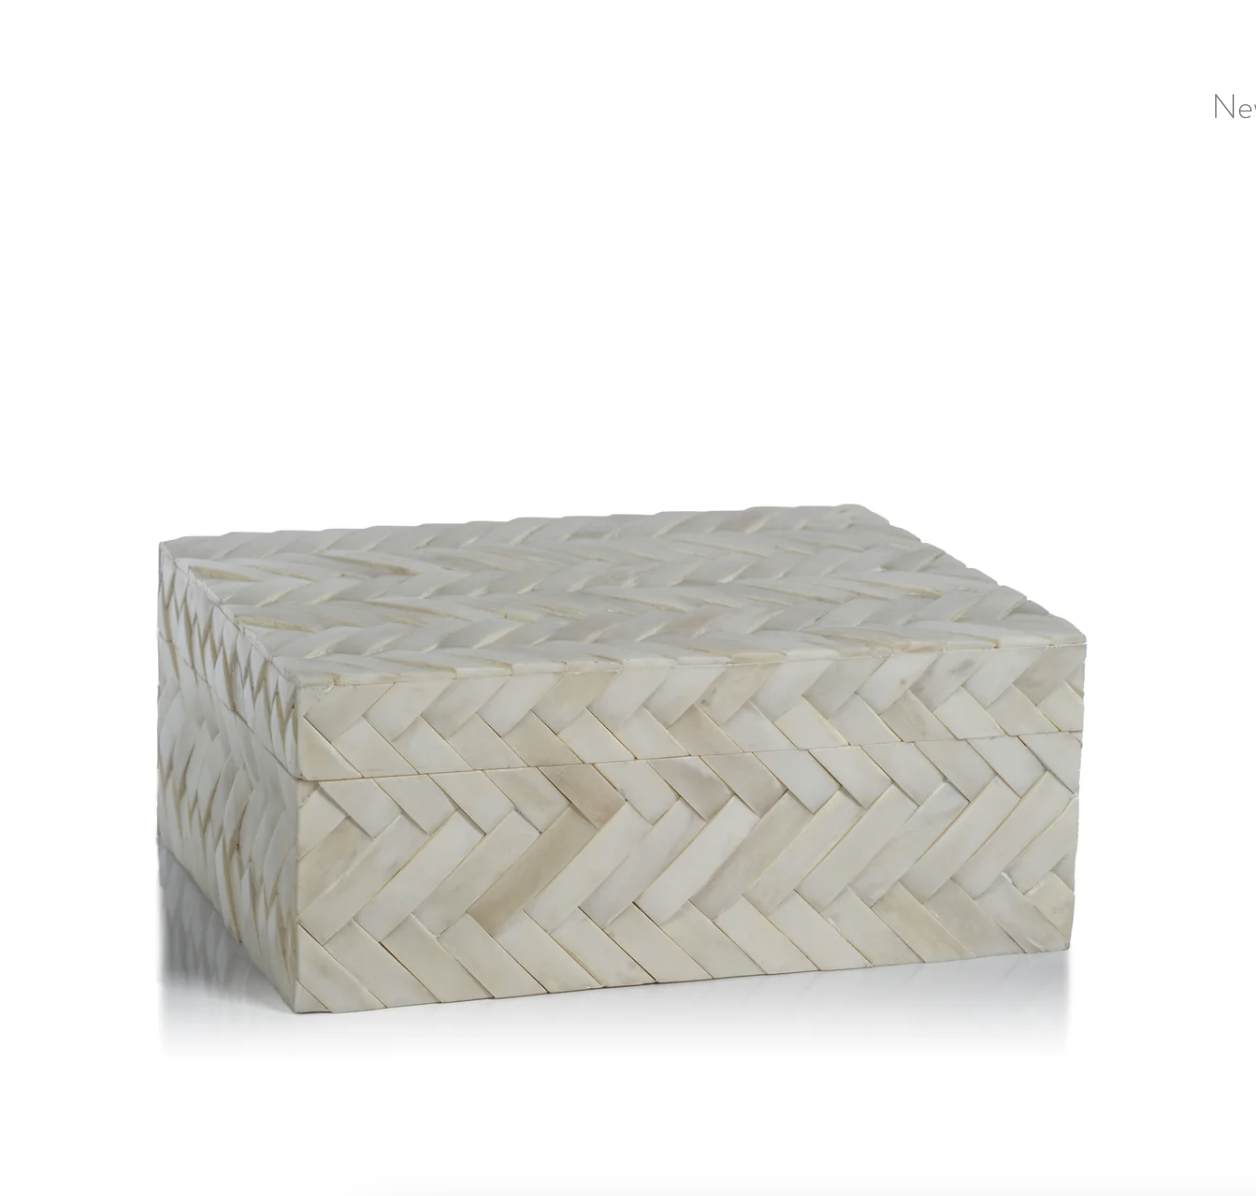 A square, woven Bone Braided Box bungalow-style box with a lid, crafted from light-colored materials, displayed against a white background. Made by Zodax.